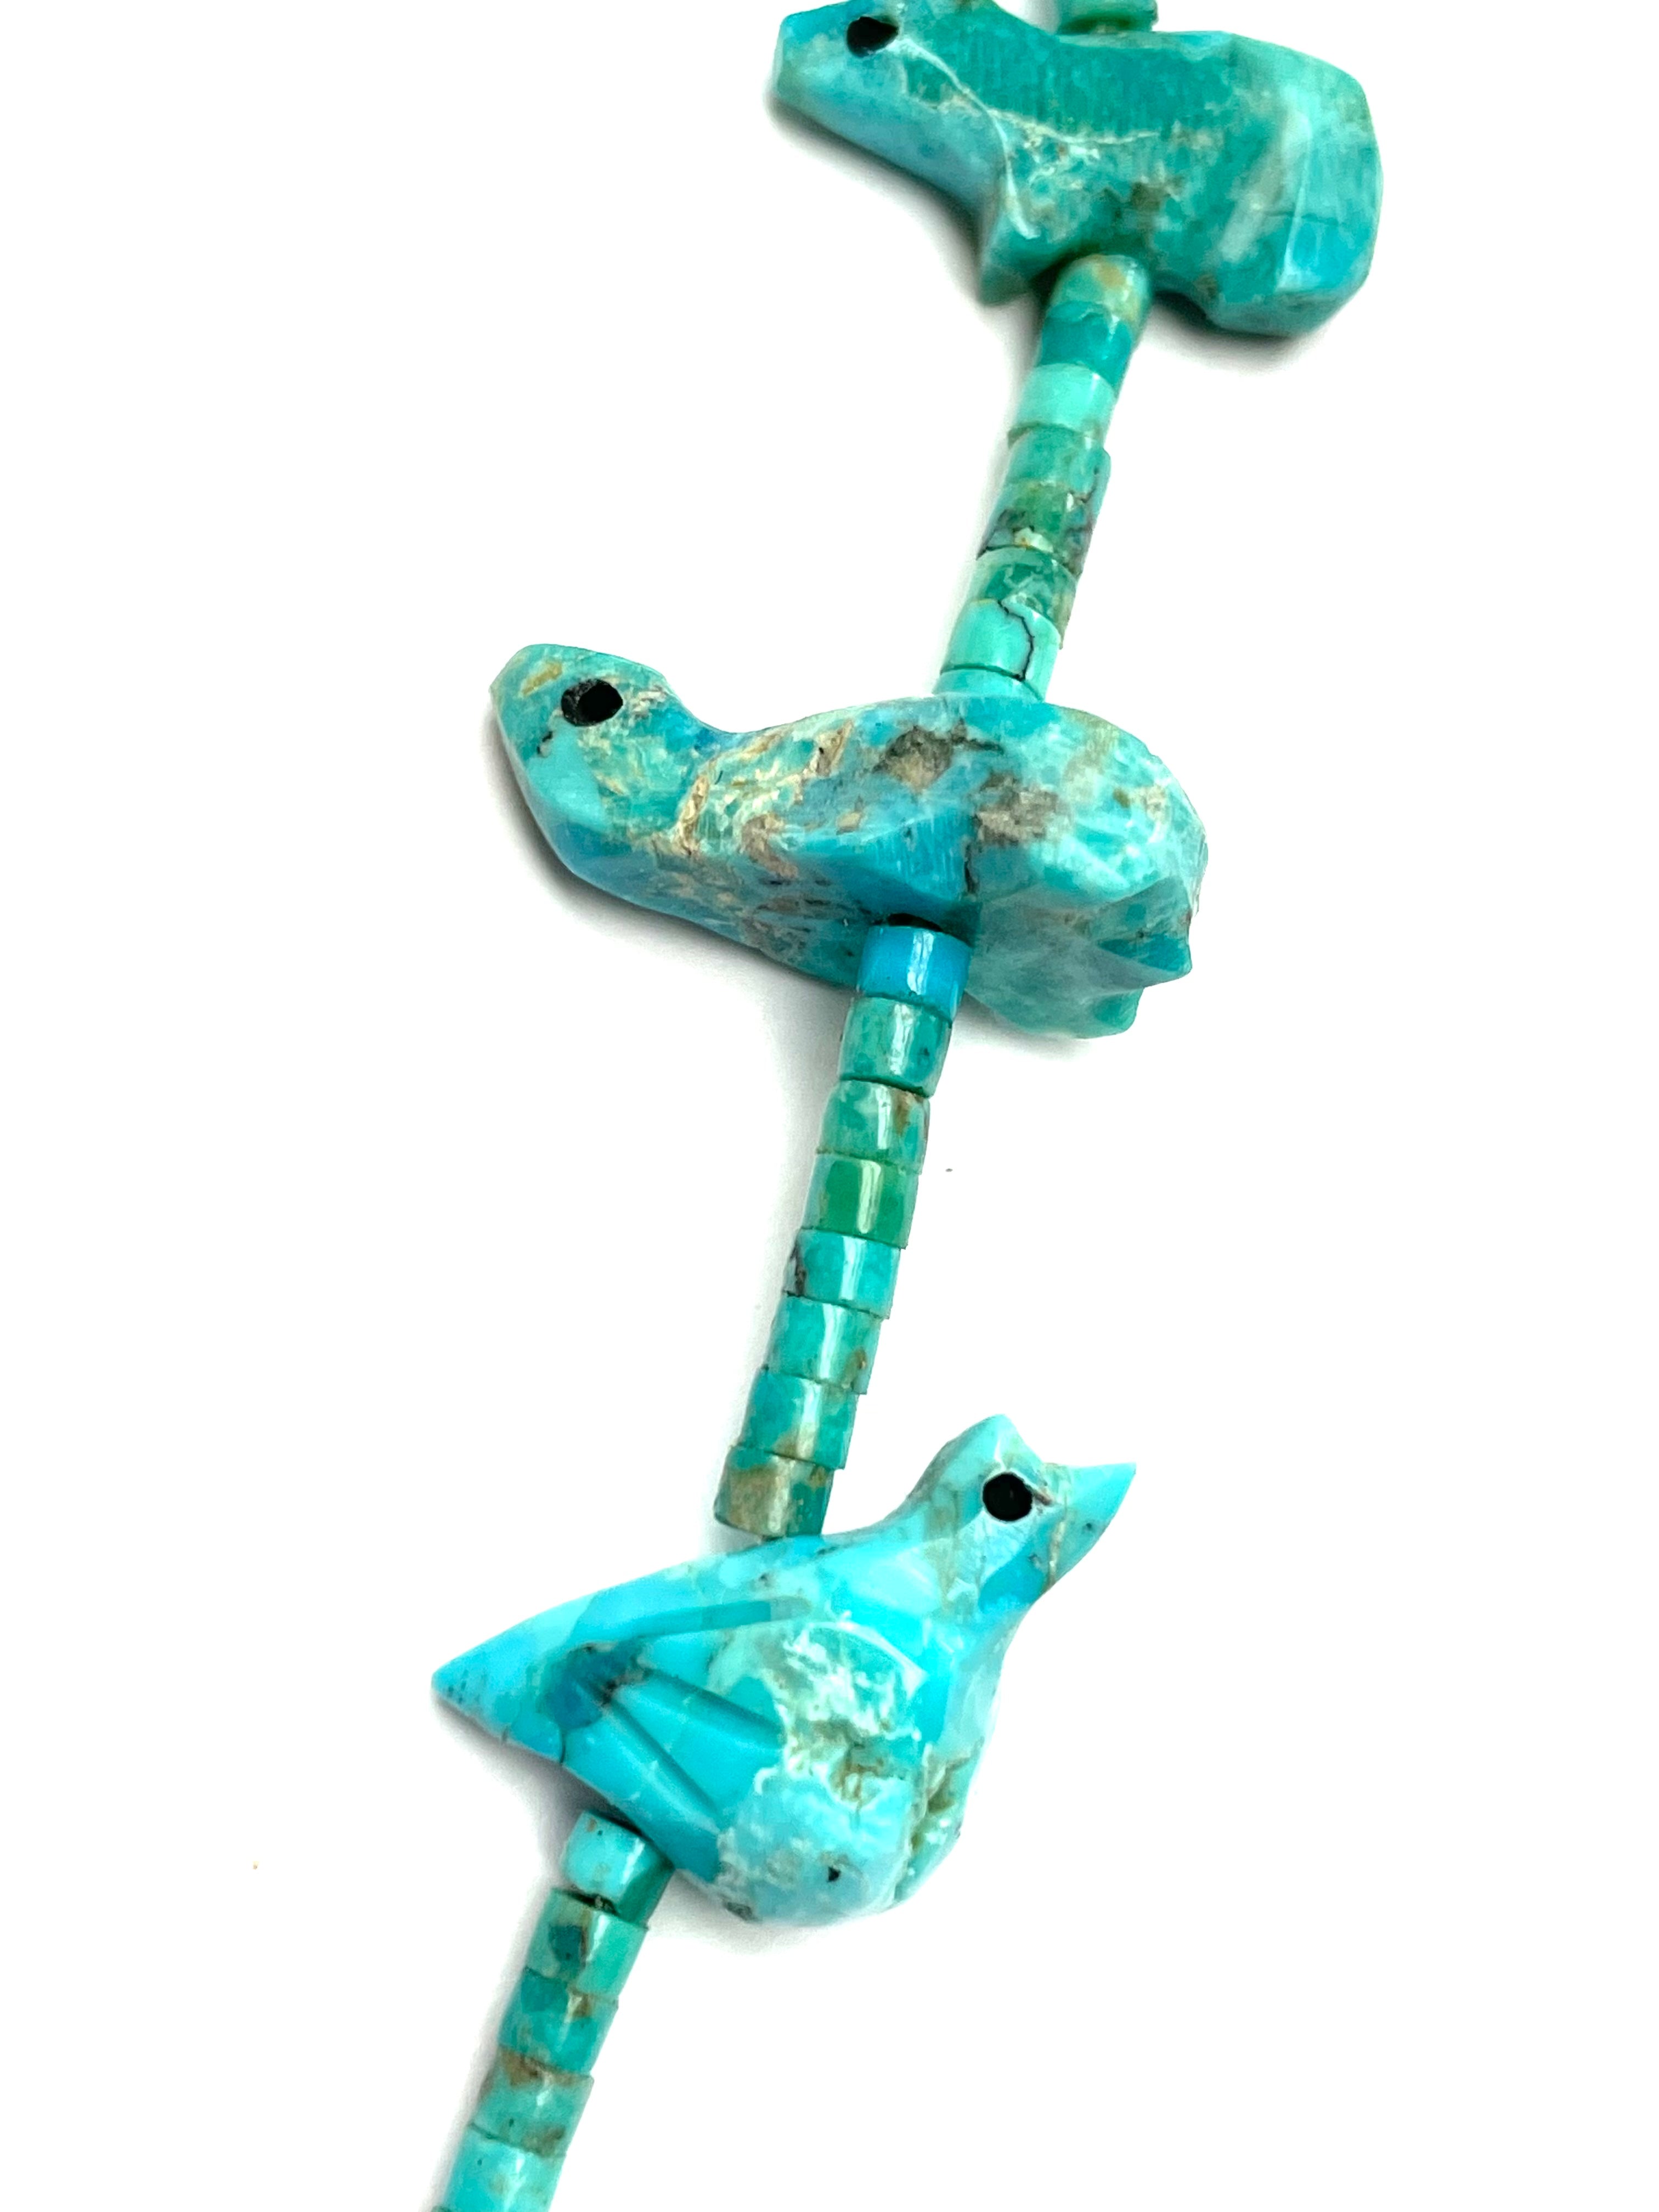 Turquoise New power animal necklace 18 inch